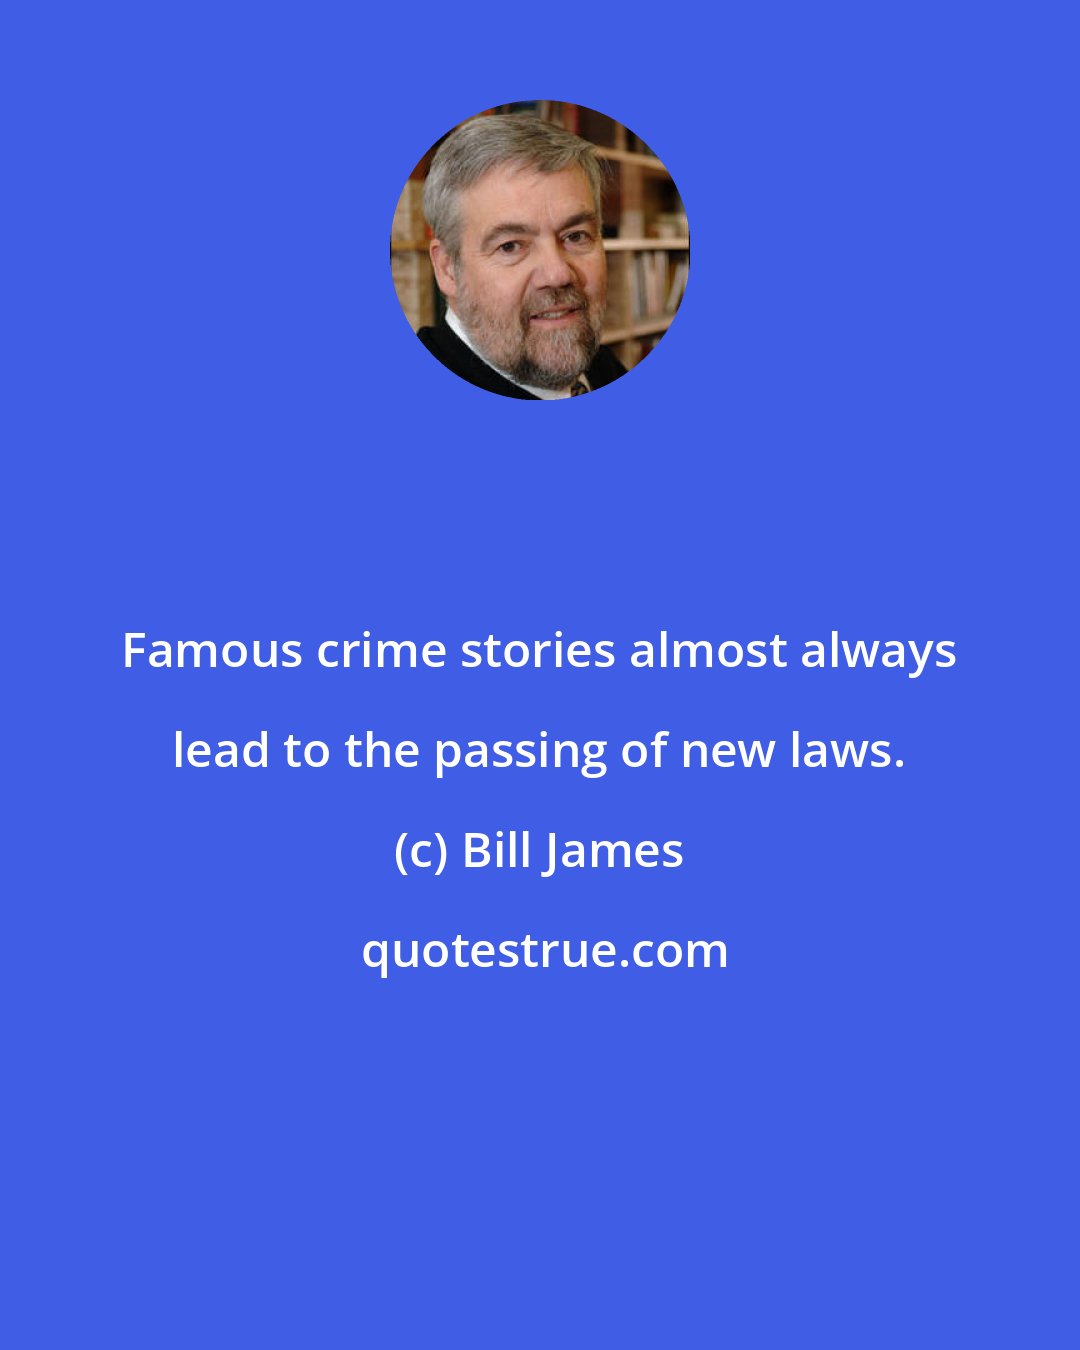 Bill James: Famous crime stories almost always lead to the passing of new laws.